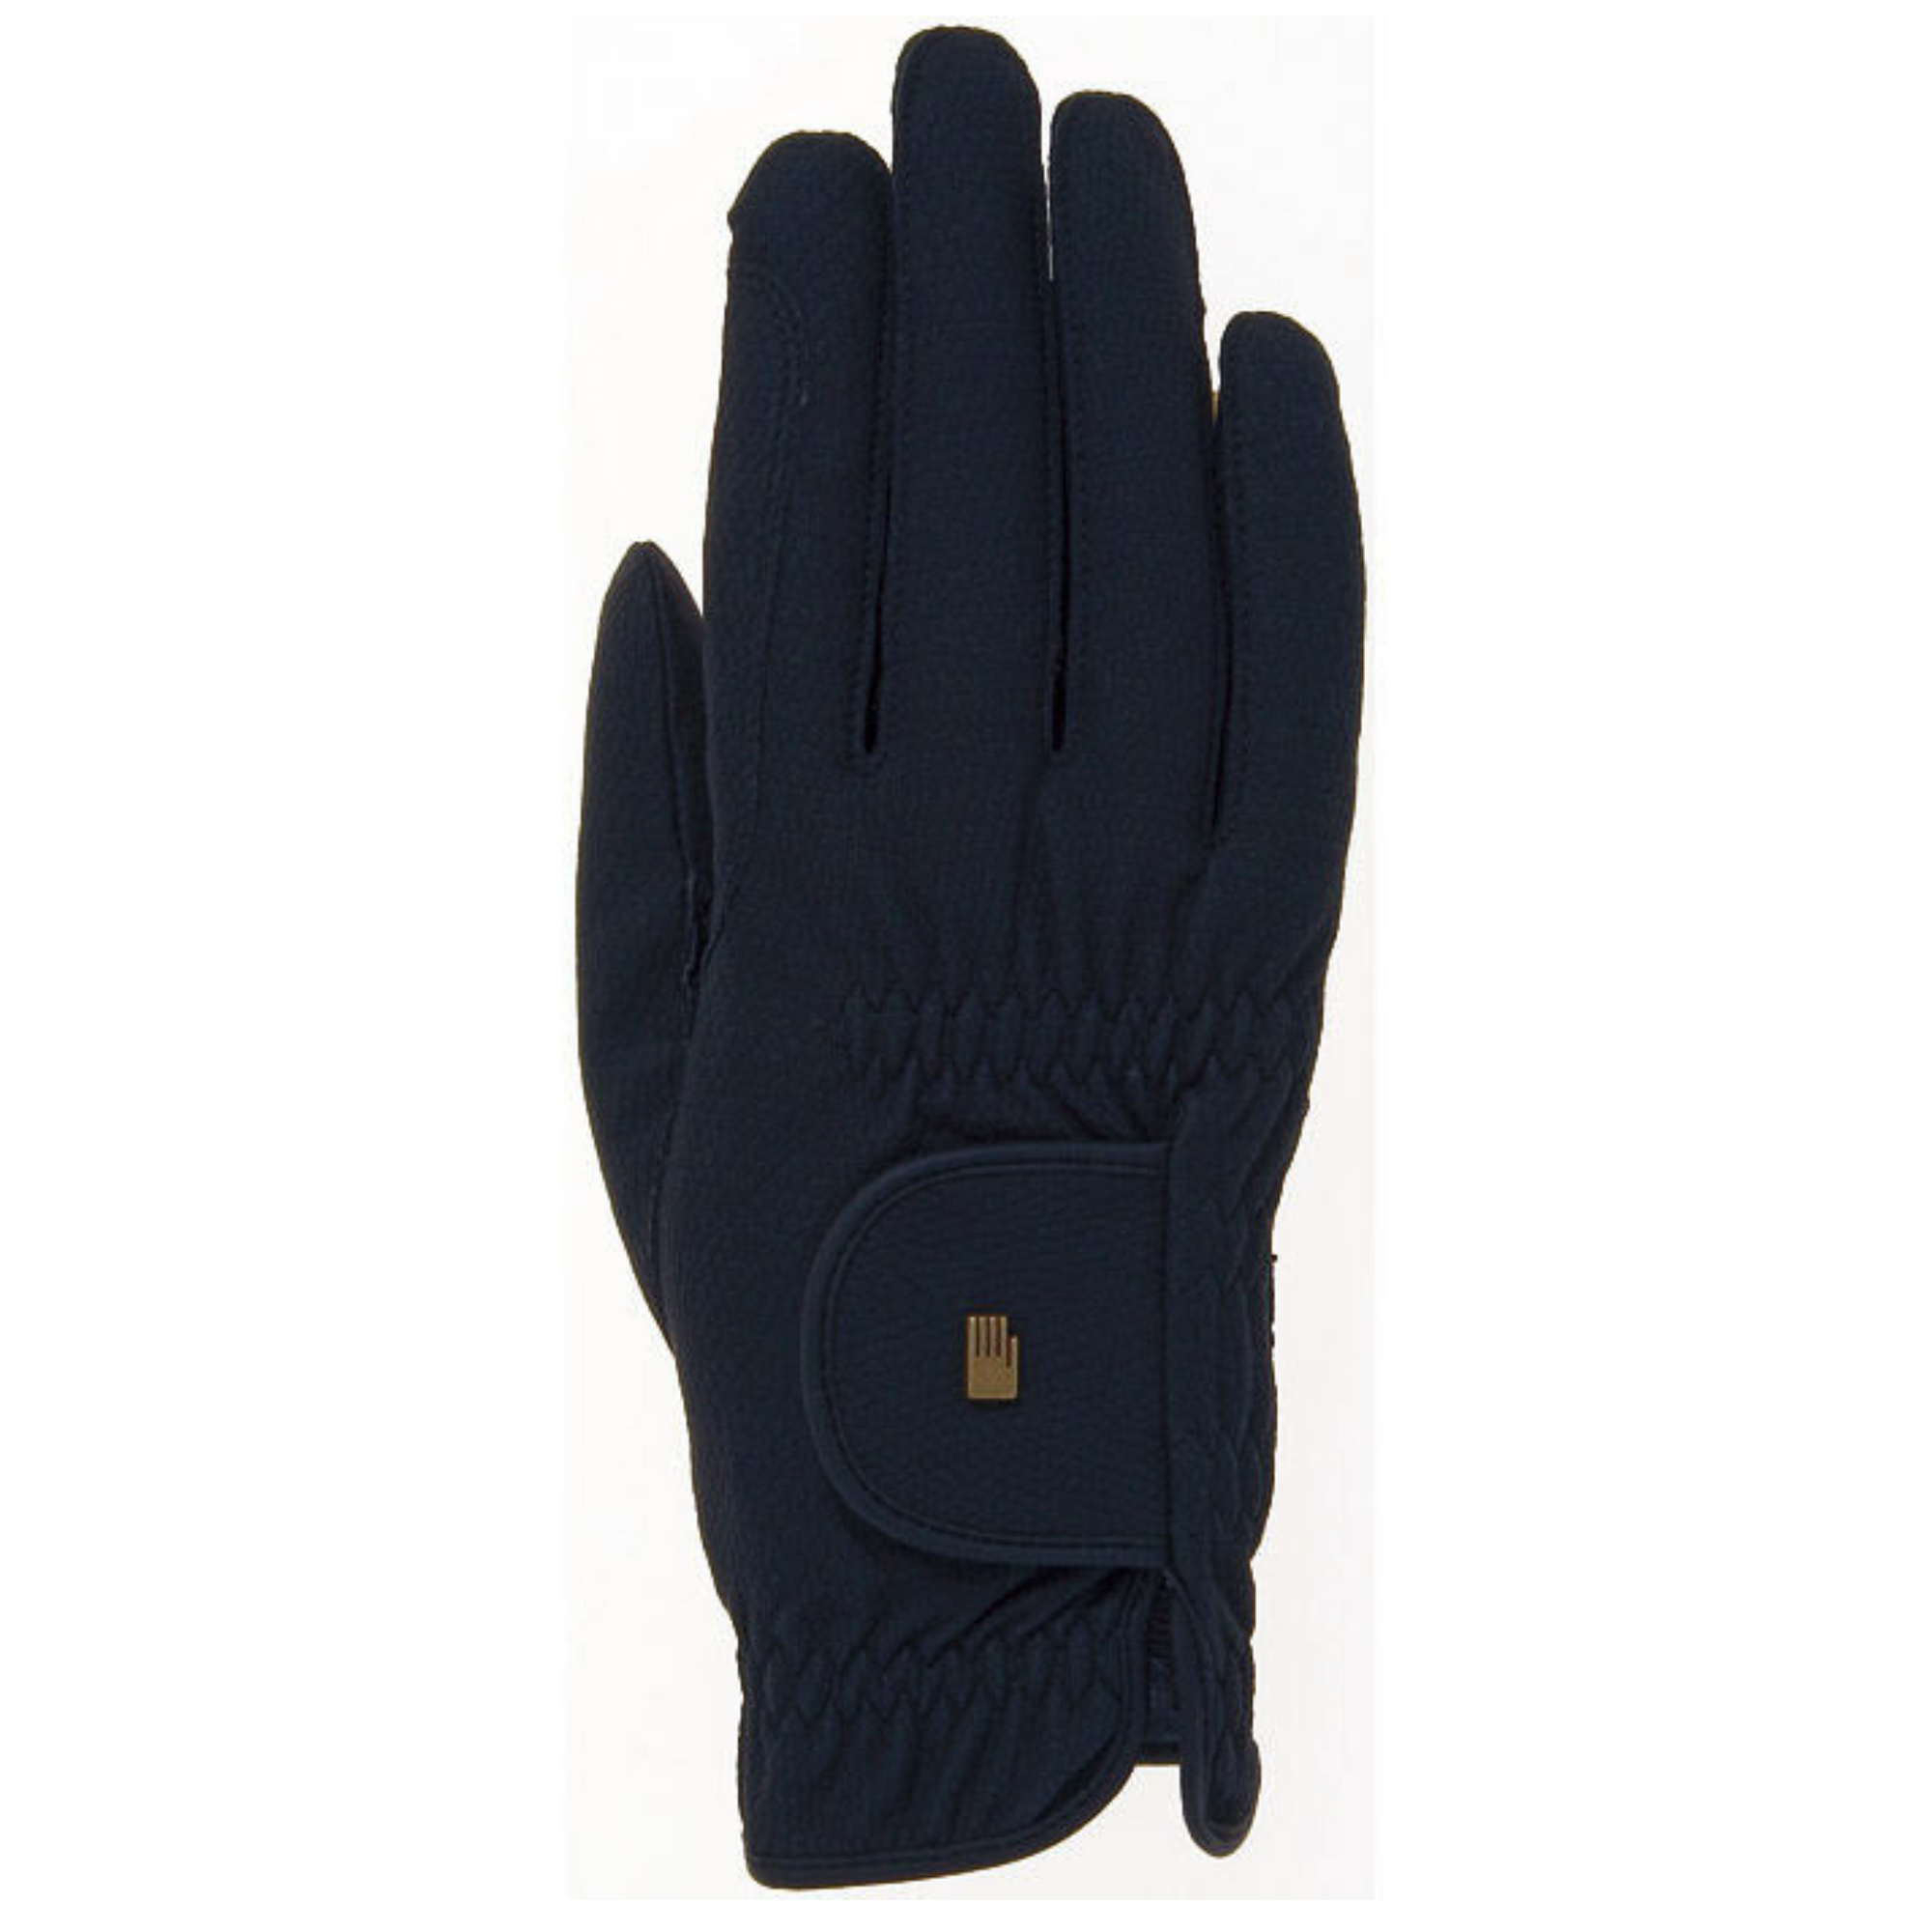 8 Roeckl equestrian gloves in different colours